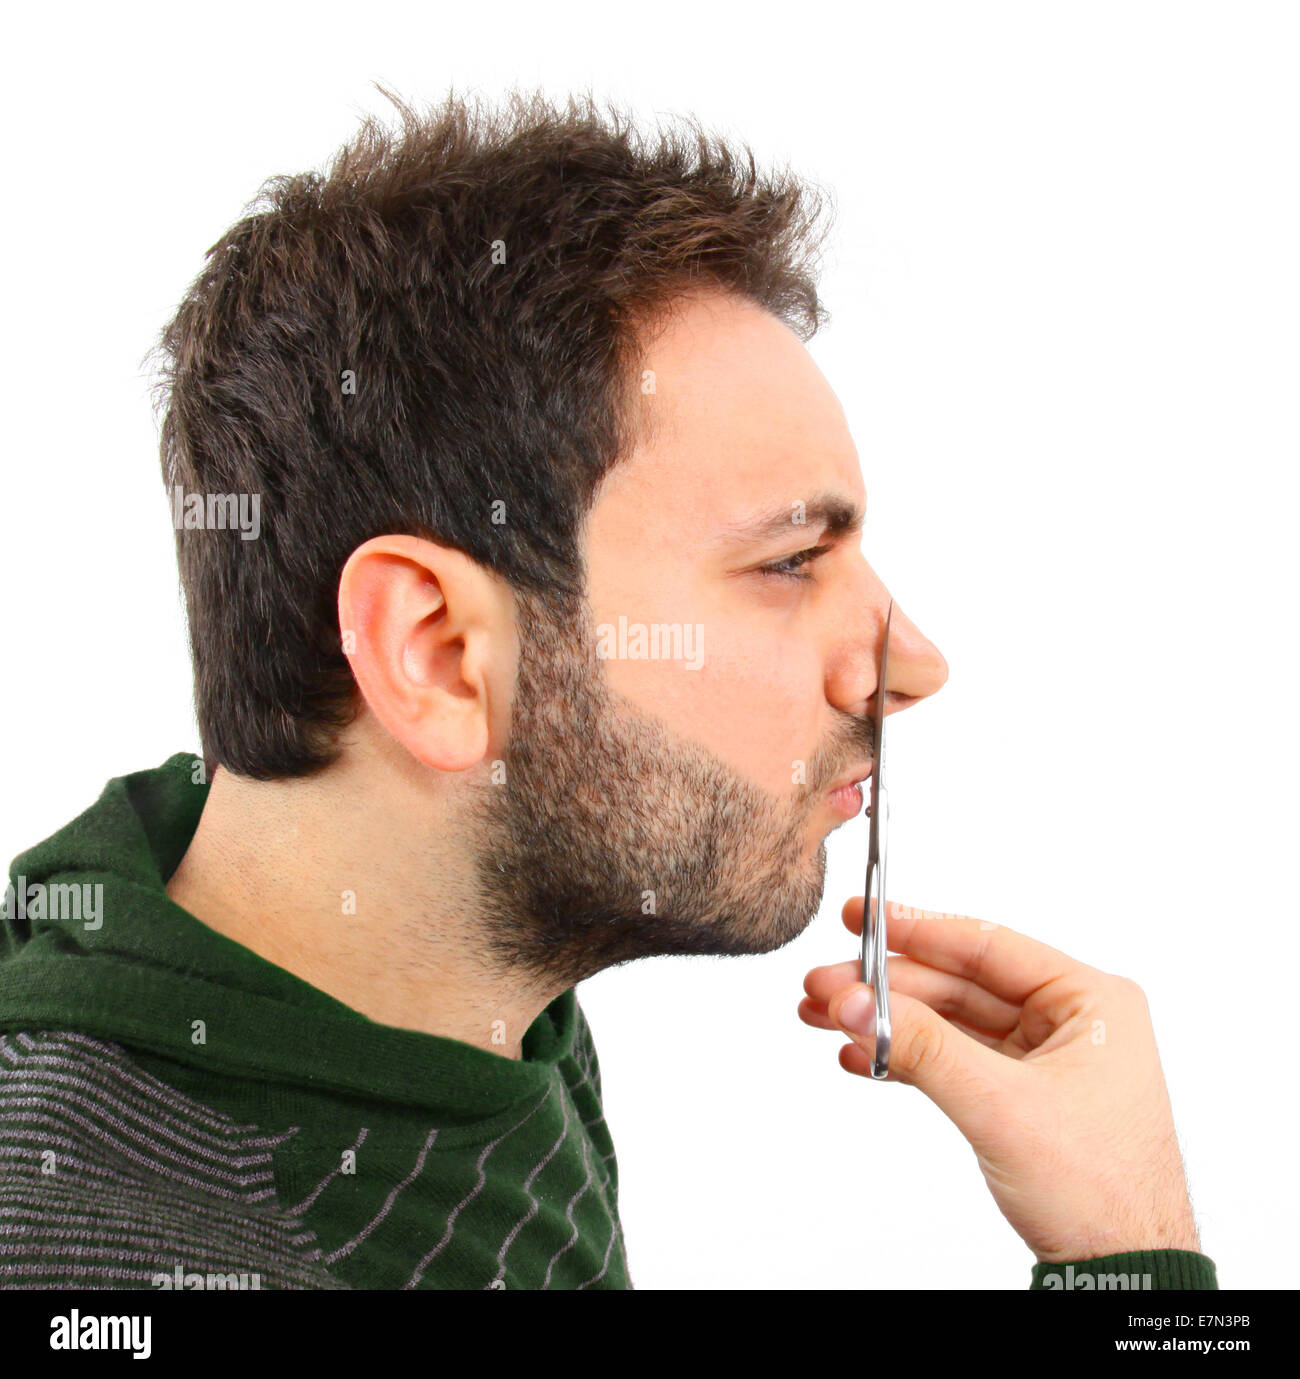 Concept of cosmetic surgery. Boy symbolically cutting the nose with scissors. Stock Photo